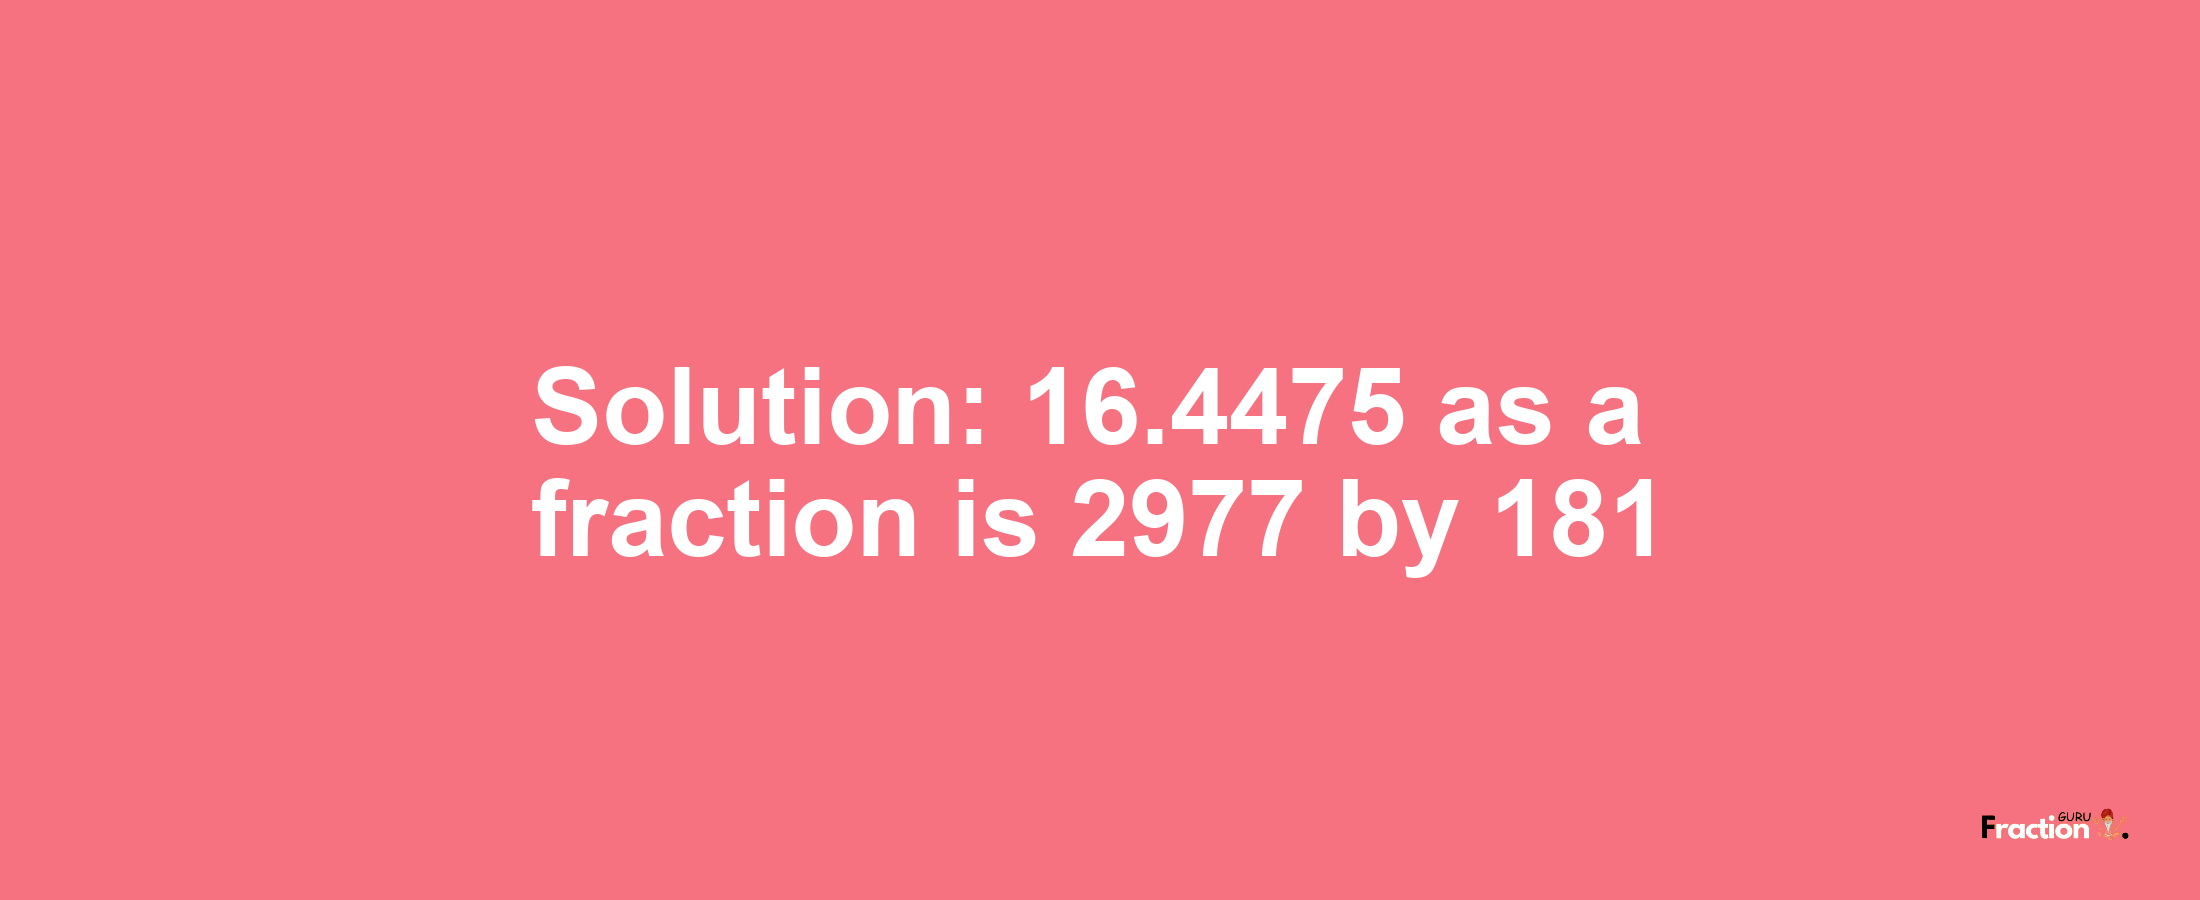 Solution:16.4475 as a fraction is 2977/181